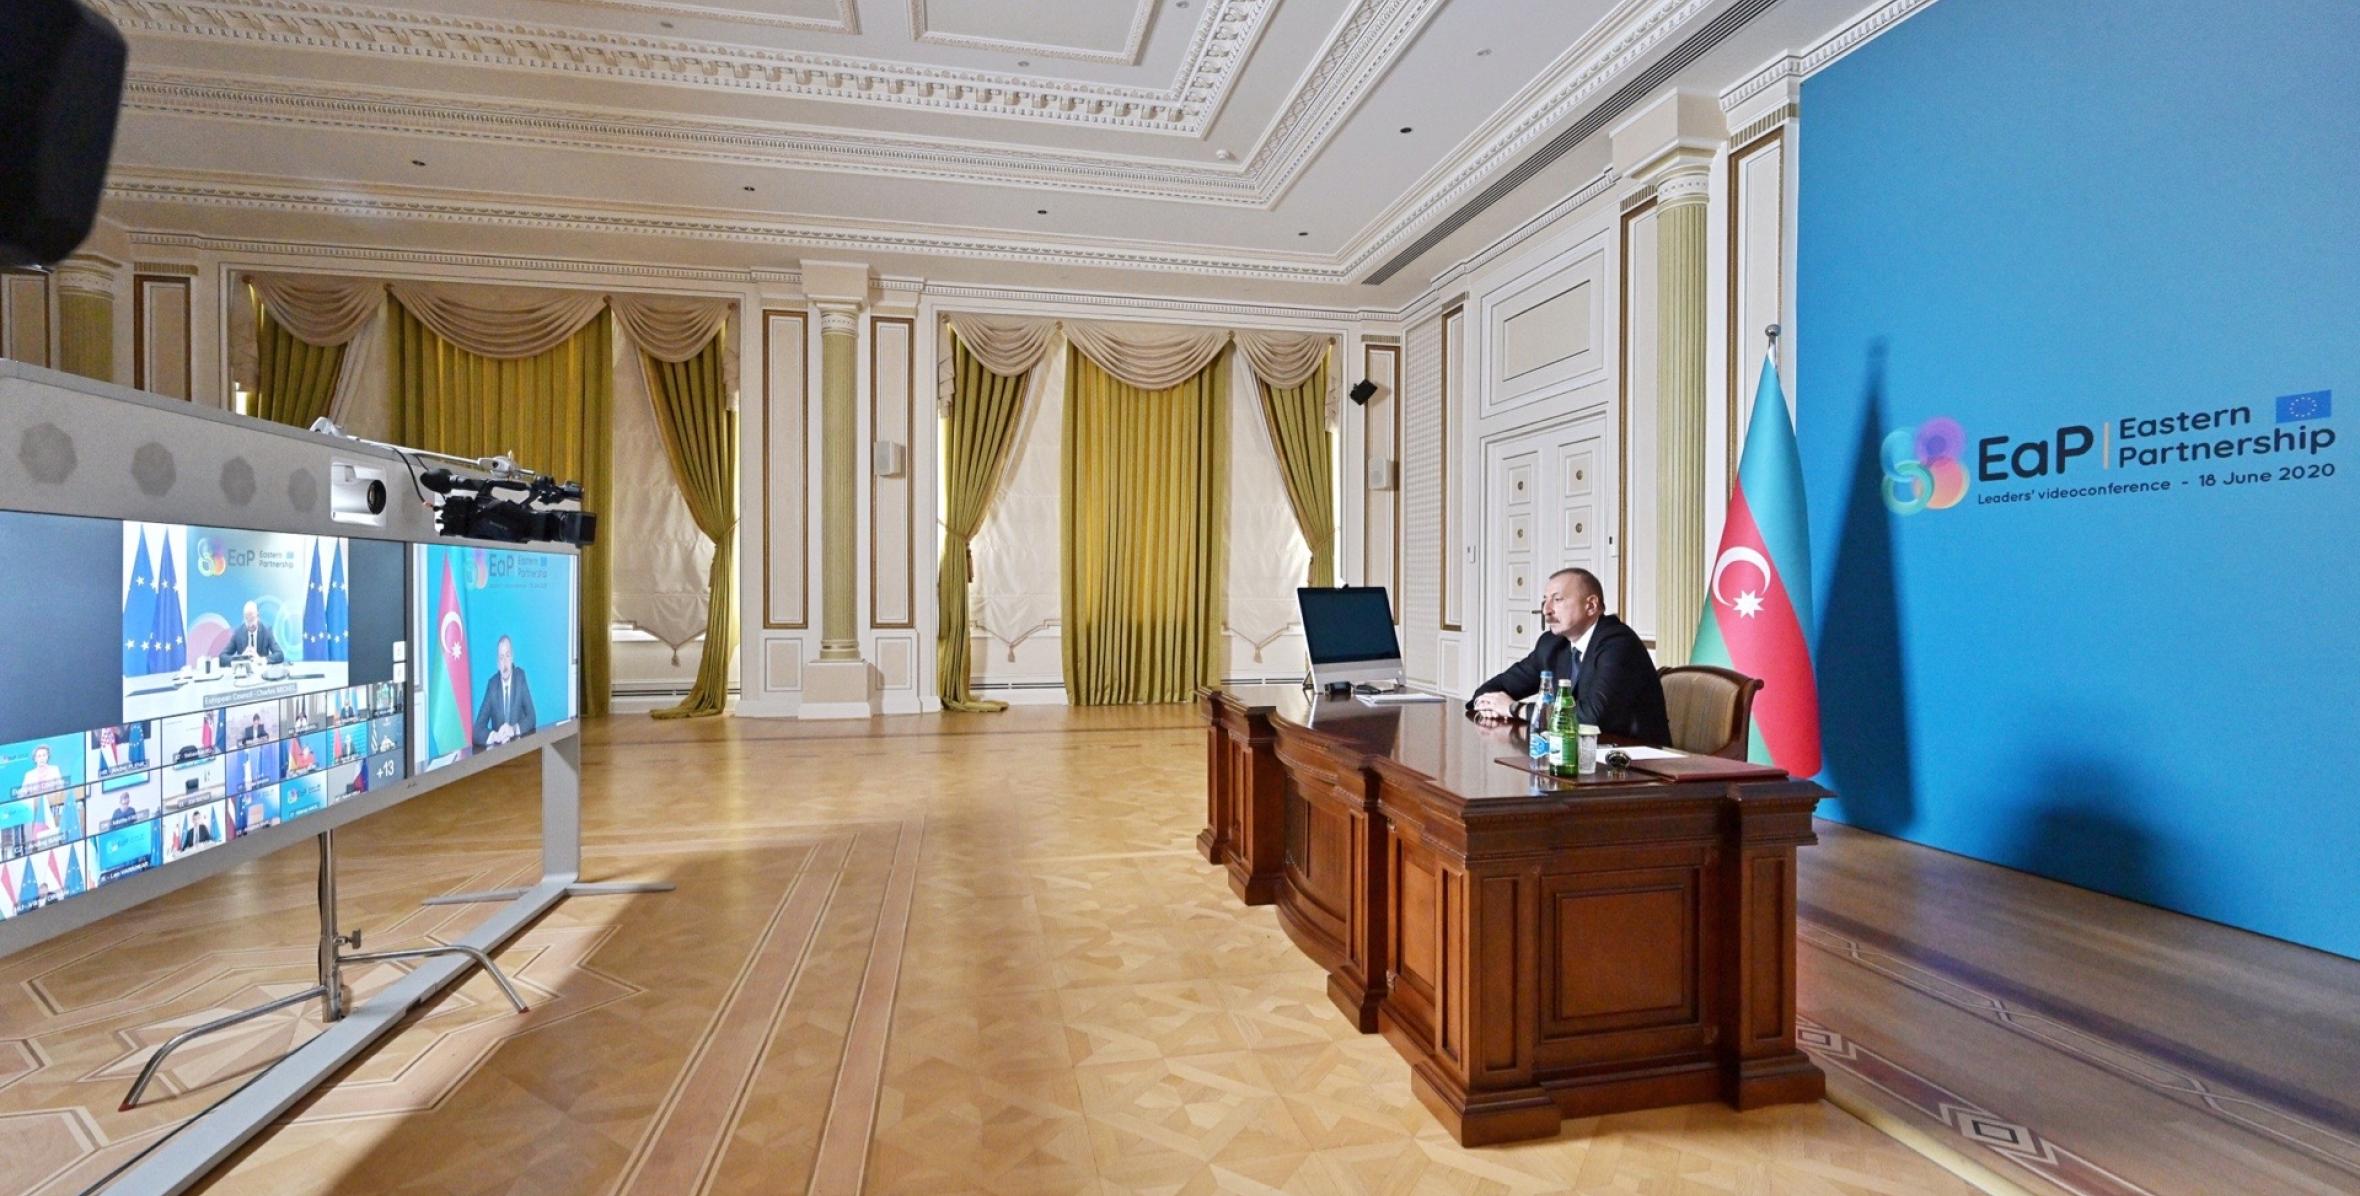 Ilham Aliyev attended Summit of Eastern Partnership countries in format of video conference